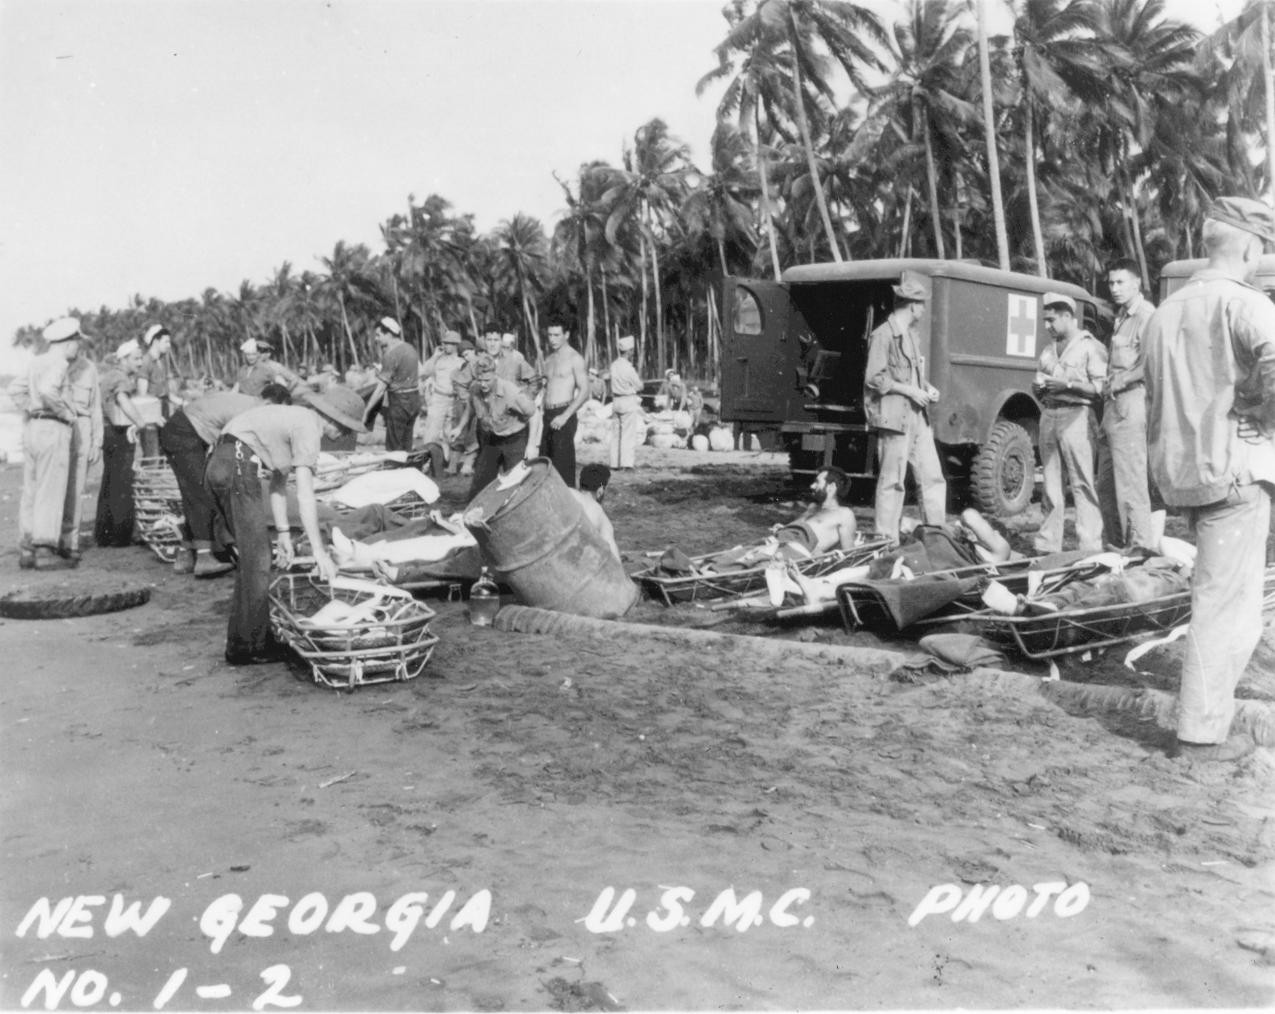 Ambulance and medical personnel, New Georgia, 1943